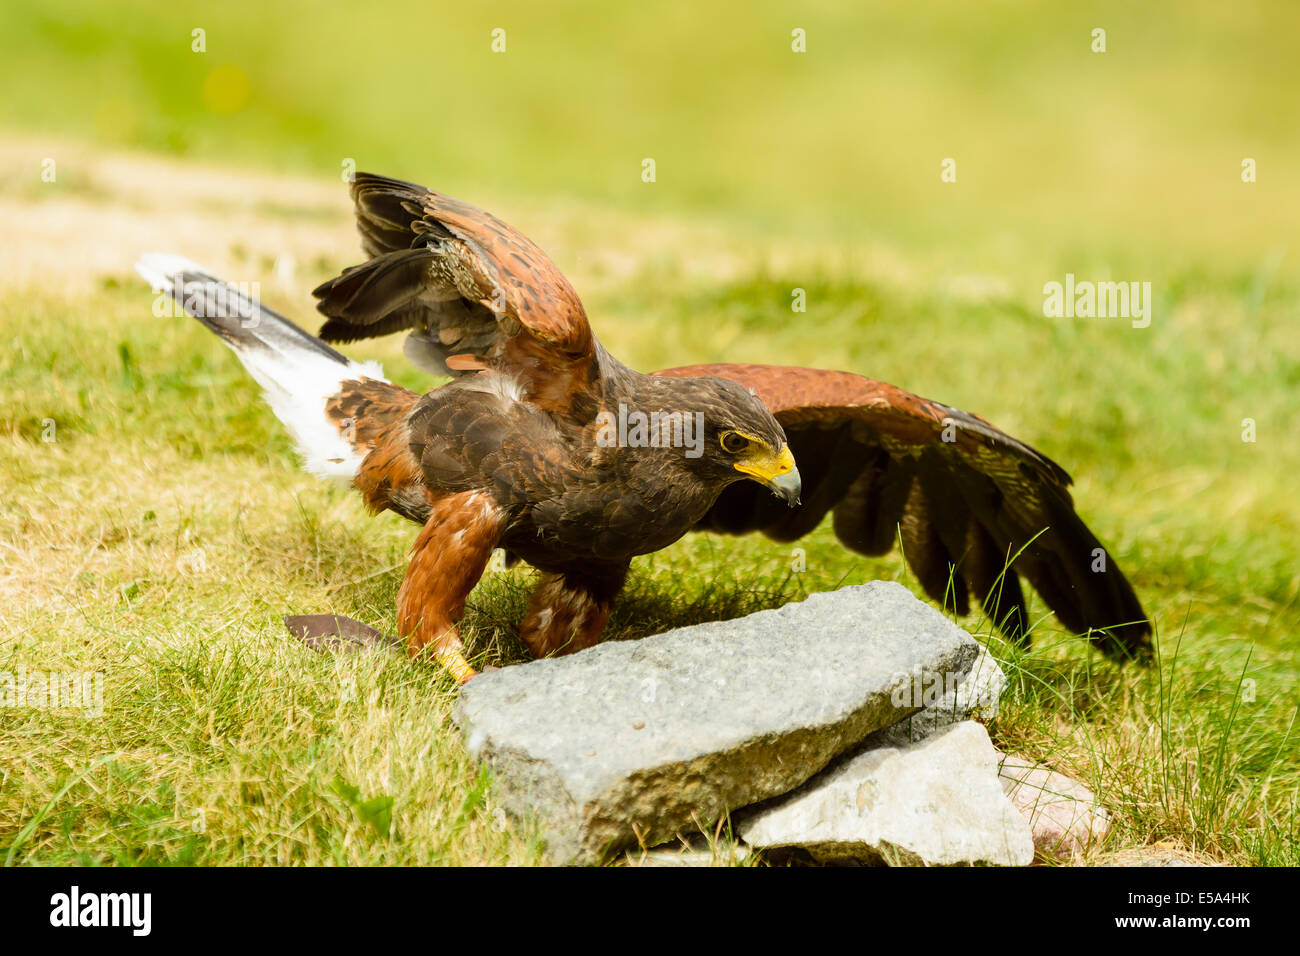 Harris hawk, Parabuteo unicinctus, on the ground. This bird of prey is also known as bay-winged or dusky hawk. Stock Photo